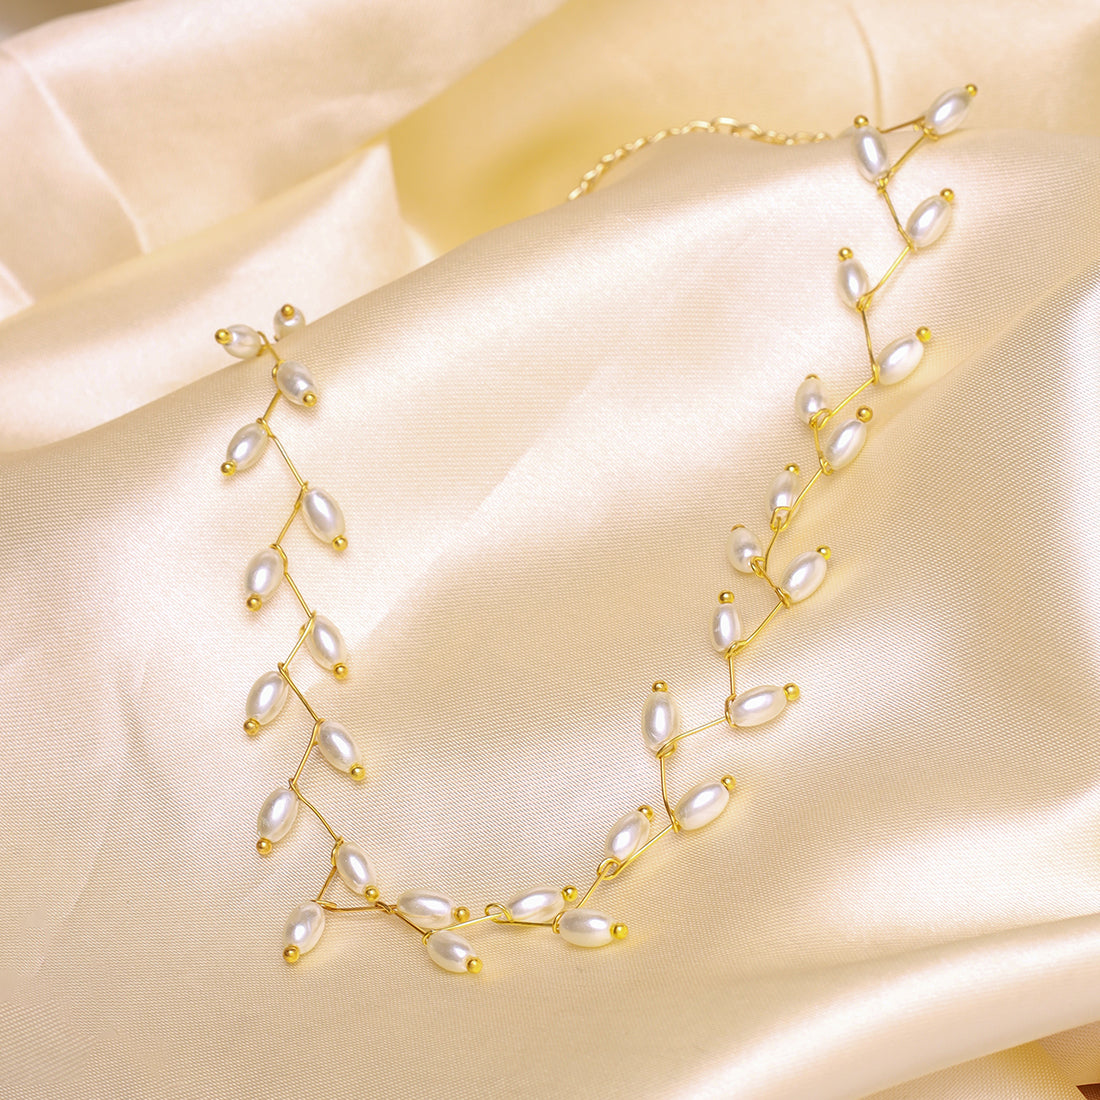 Gold-Tone Choker Necklace With Oval Pearls Arranged In A Leaf Pattern